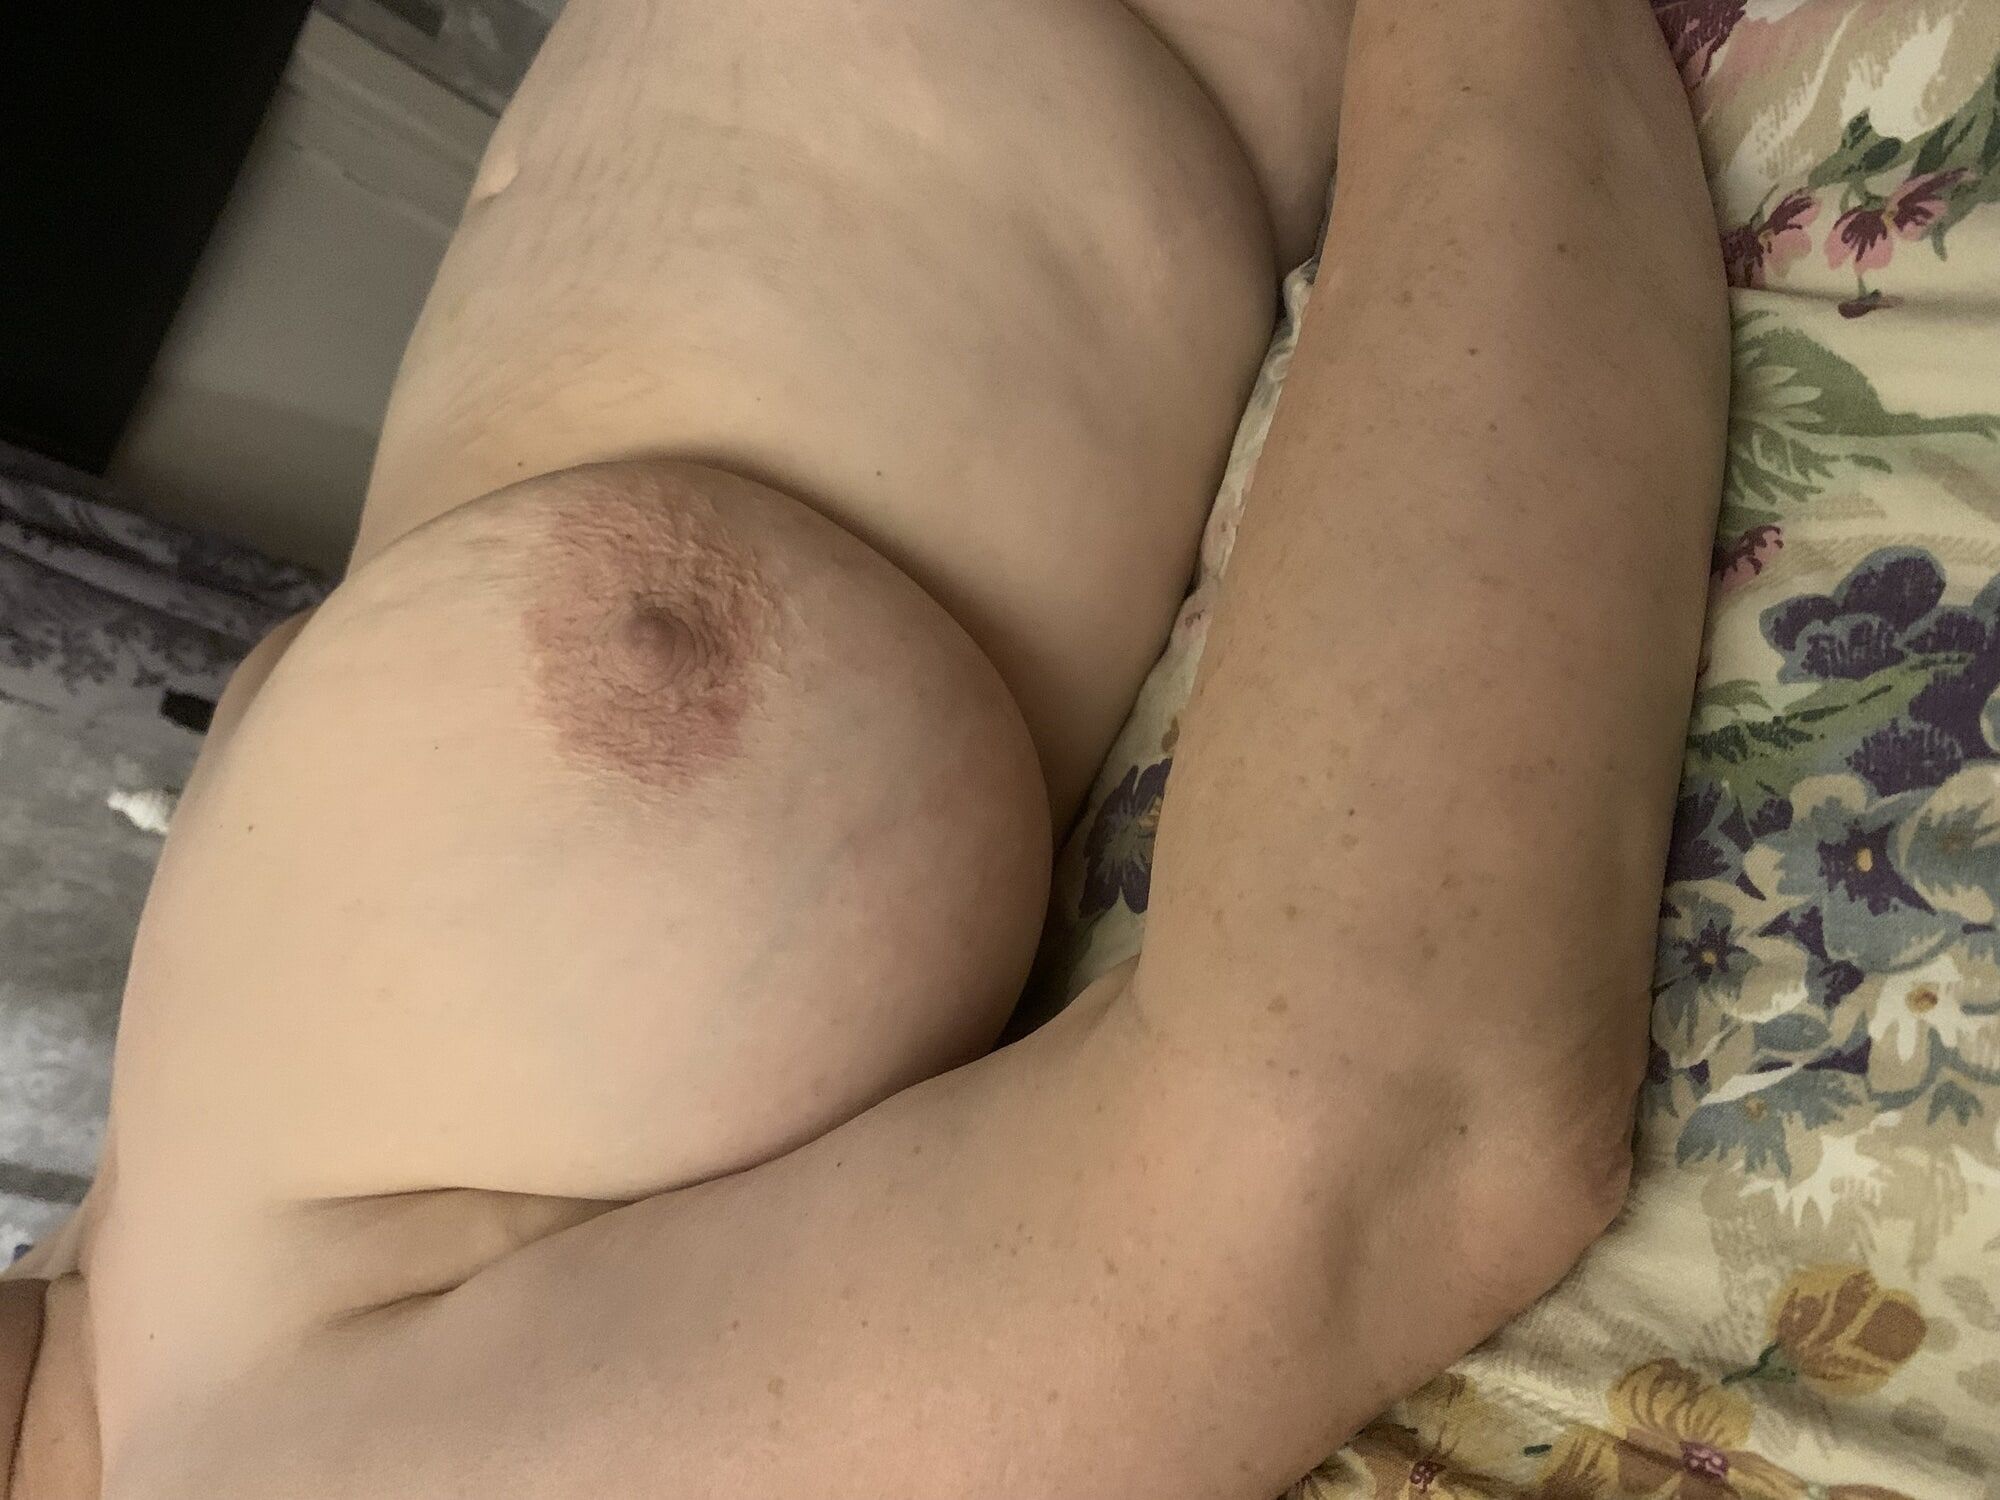 hi, here are more pictures of my little cock and my wife's t #3